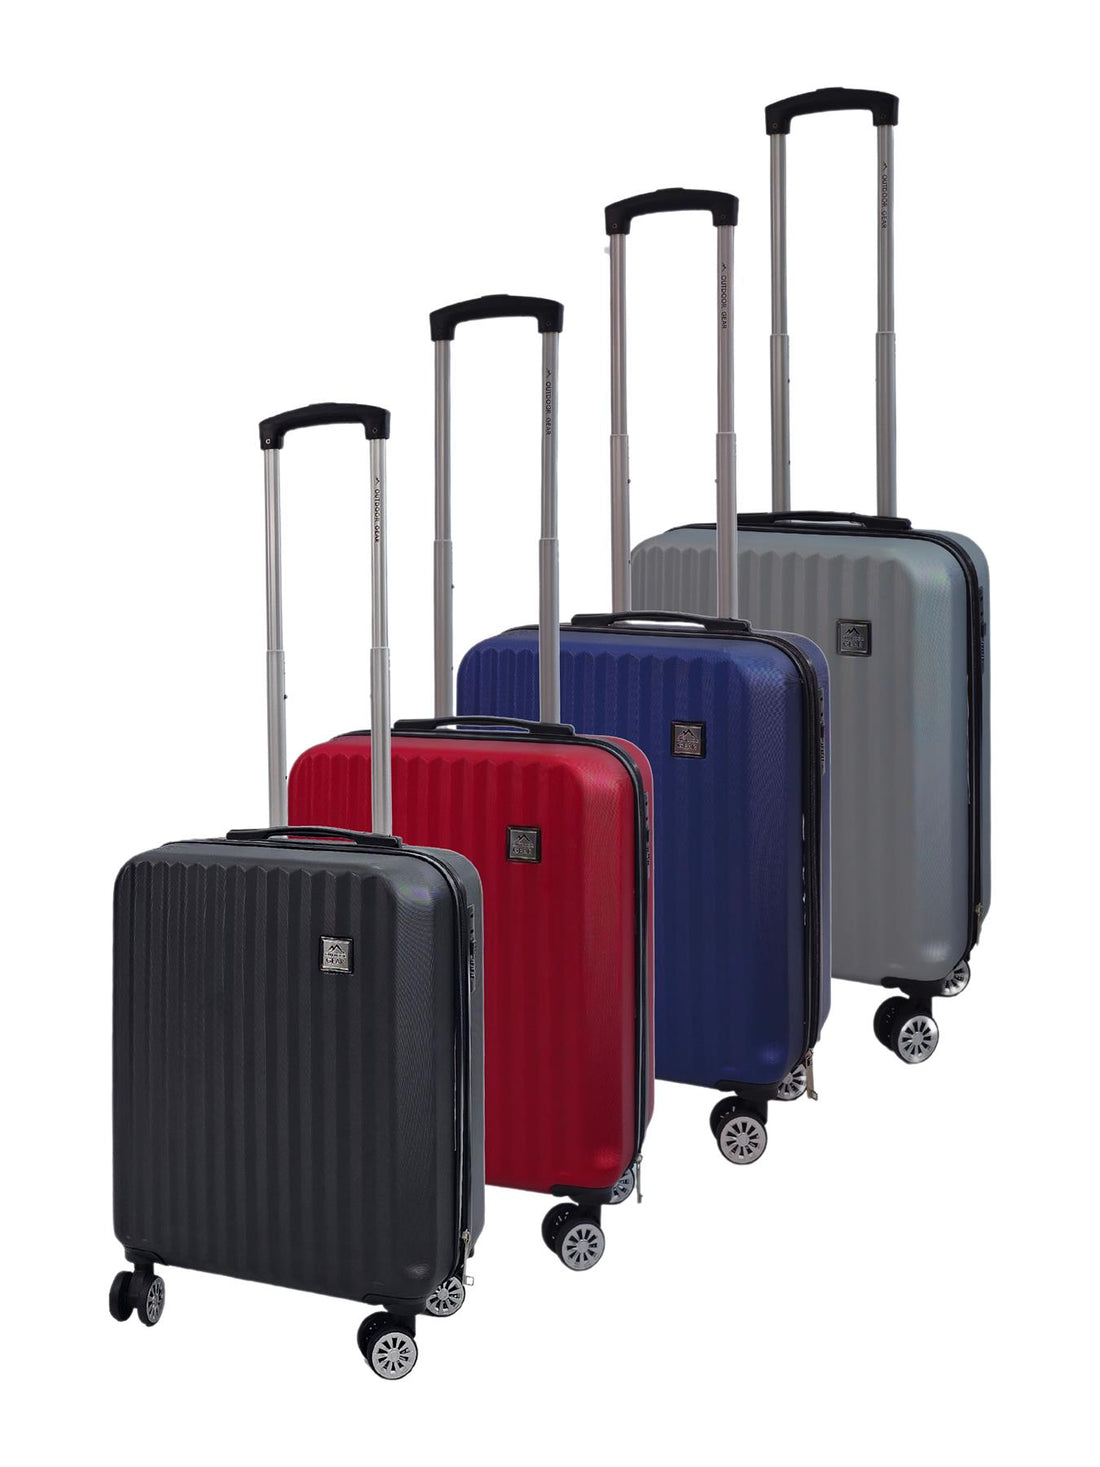 Hard Shell Classic Suitcase 8 Wheel Cabin Luggage Holiday Travel